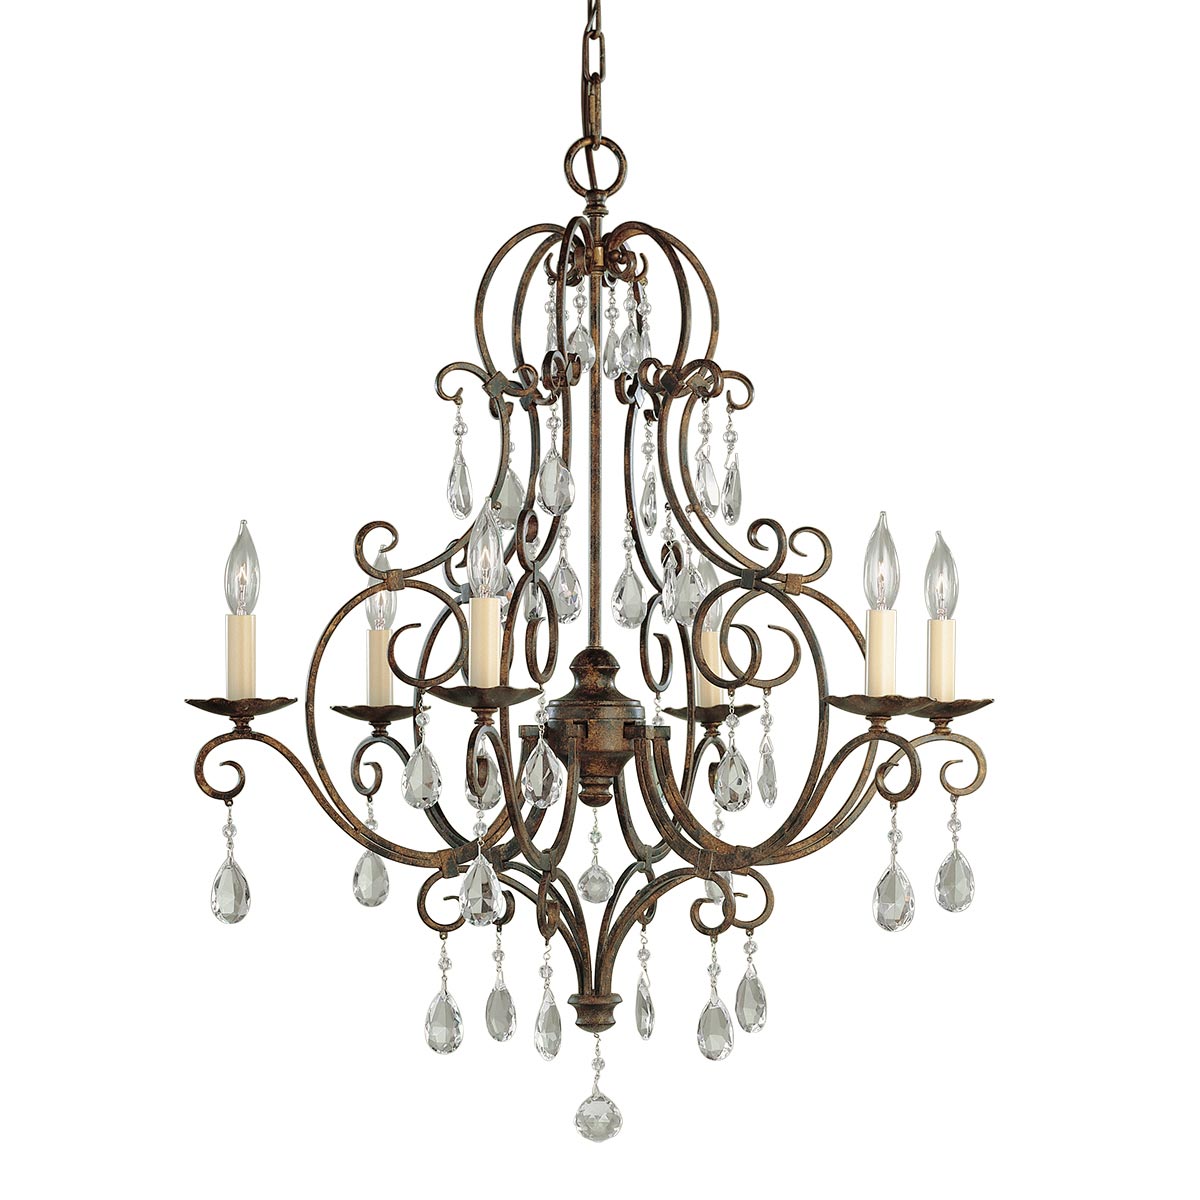 Chateau French 6 Light Birdcage Chandelier Mocha Bronze Crystal Drops